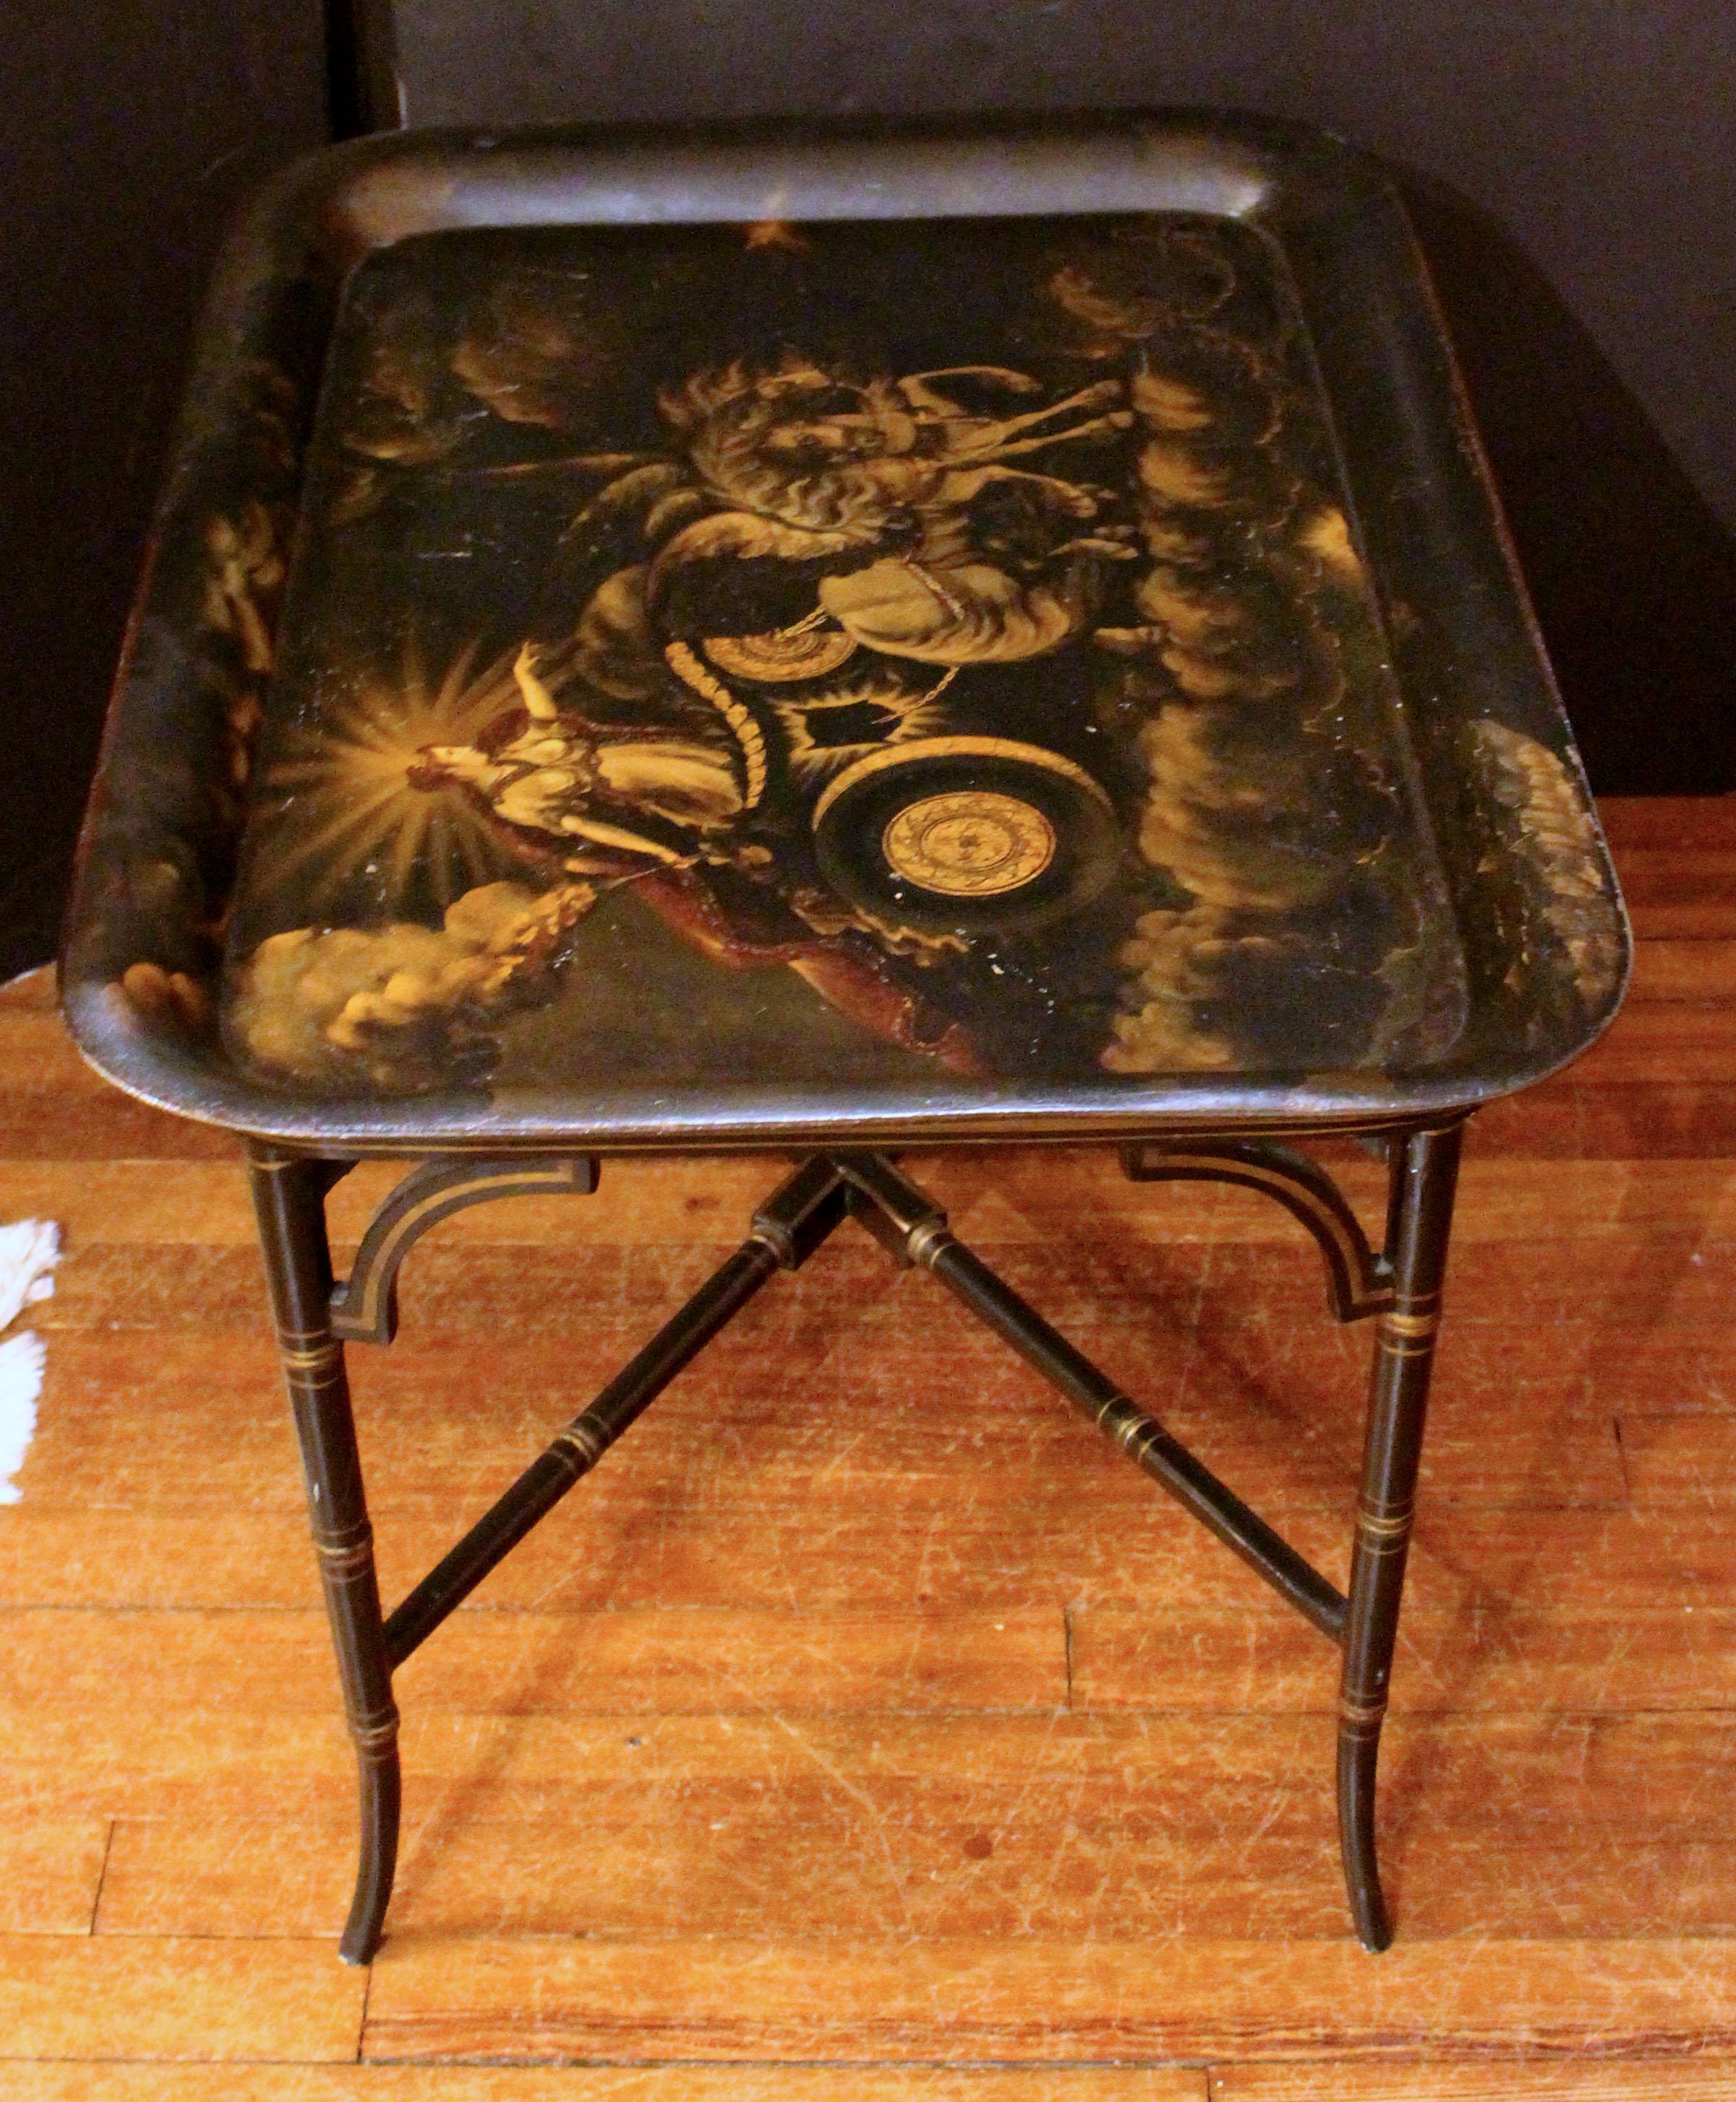 A circa 1840 well decorated tole tray now on custom coffee table height stand. The tray features the Goddess of the Dawn, Eos in Greece, Aurora in Rome, with her chariot & winged horses driving away the darkness. The wooden stand with faux bamboo